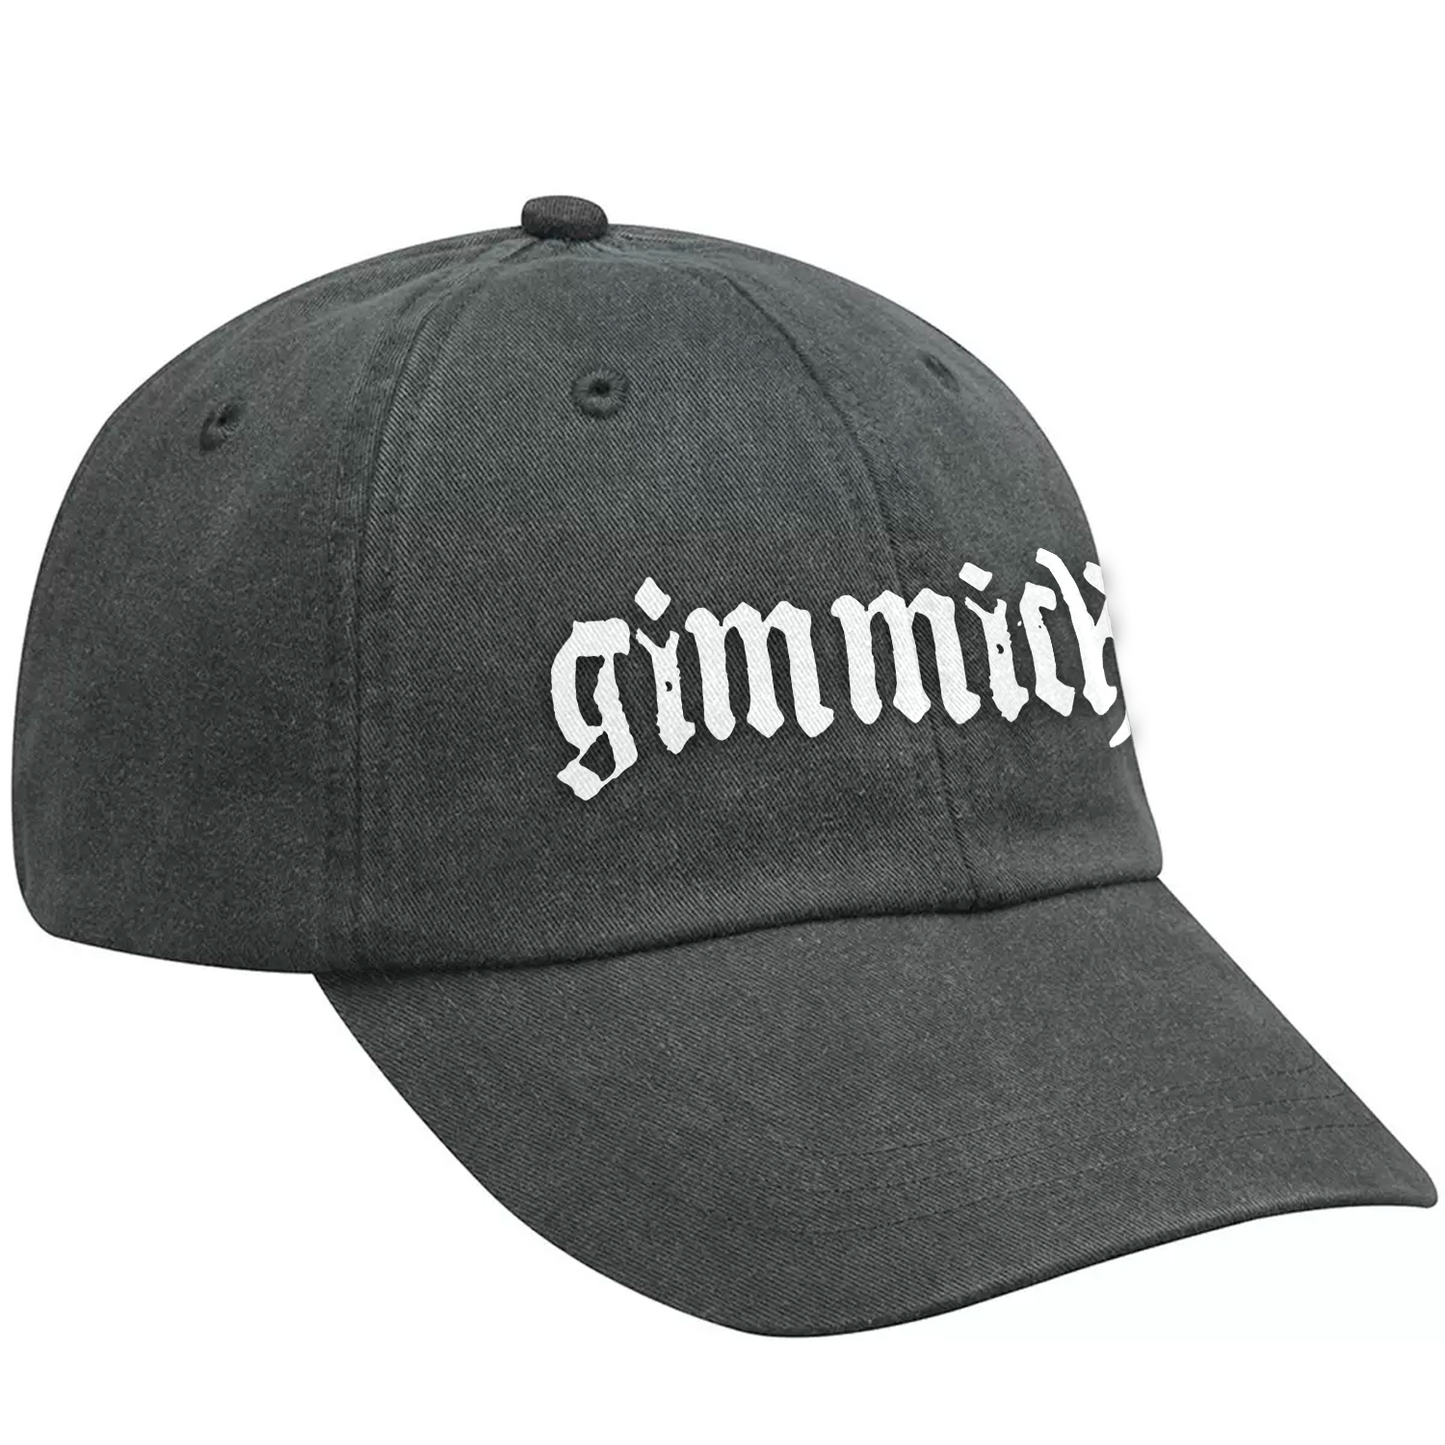 GIMMICK - Embroidered Hat